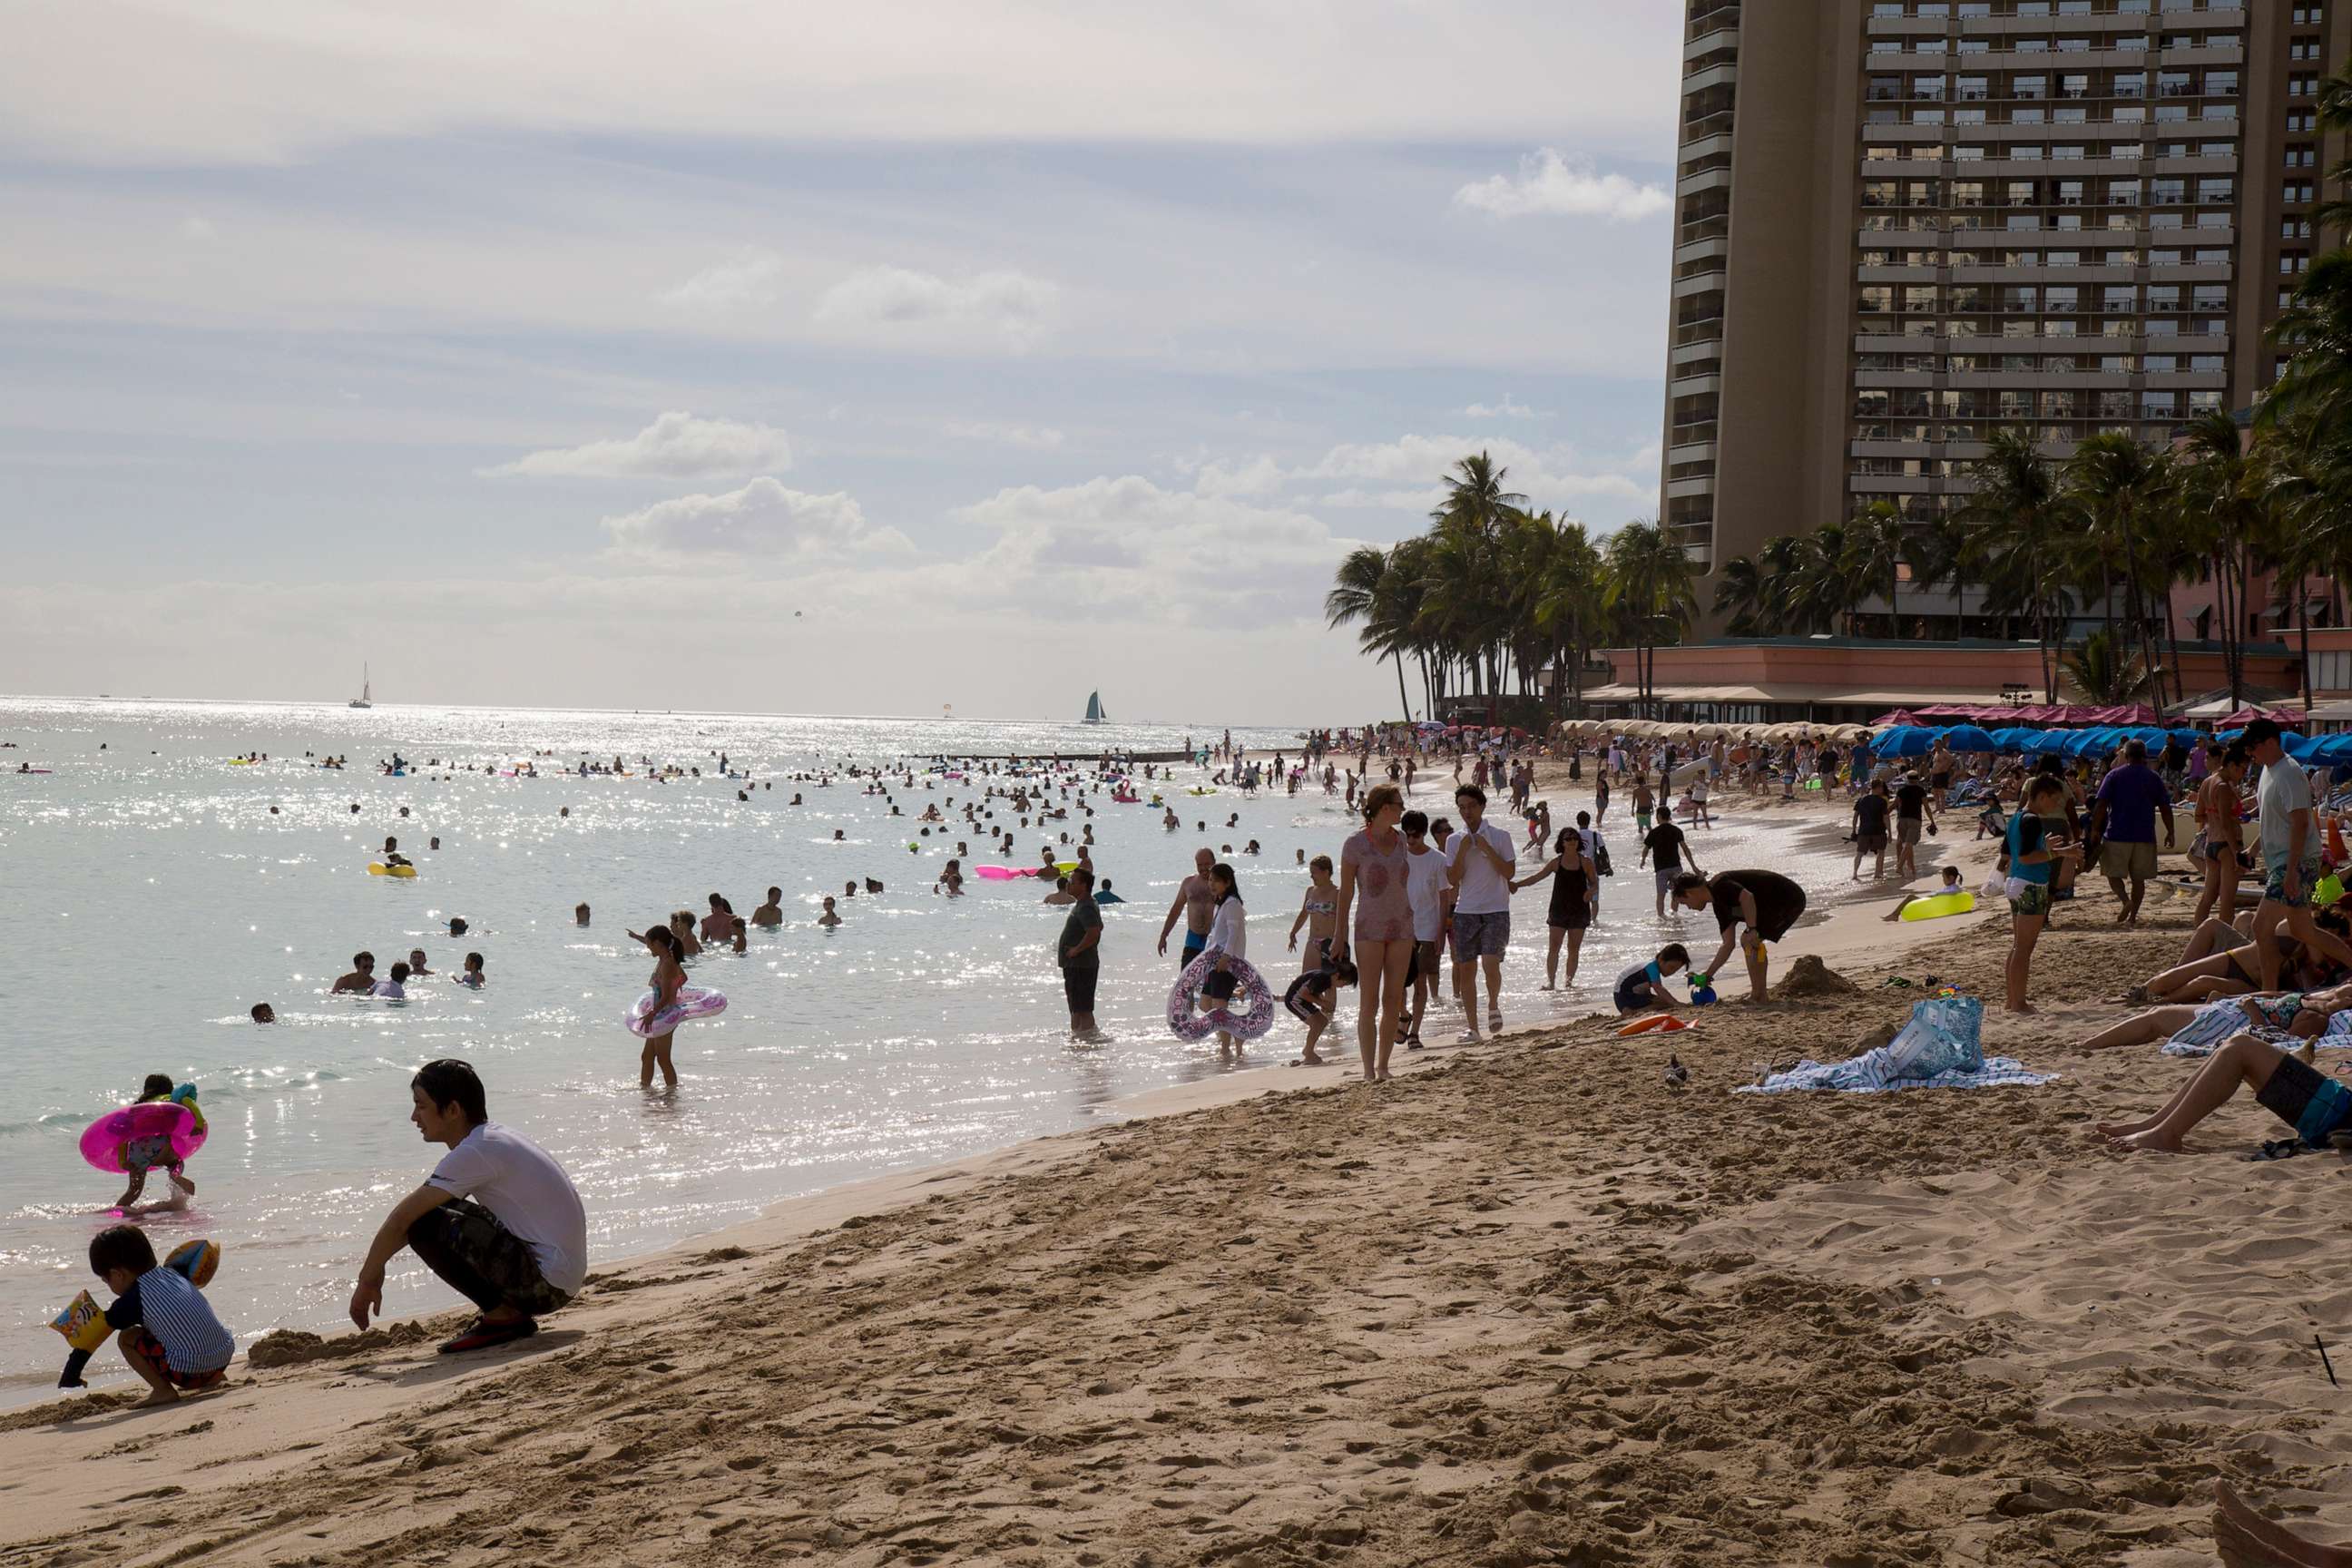 PHOTO: Both tourists and locals enjoy the day at Waikiki beach, Aug. 22, 2018, in Honolulu.